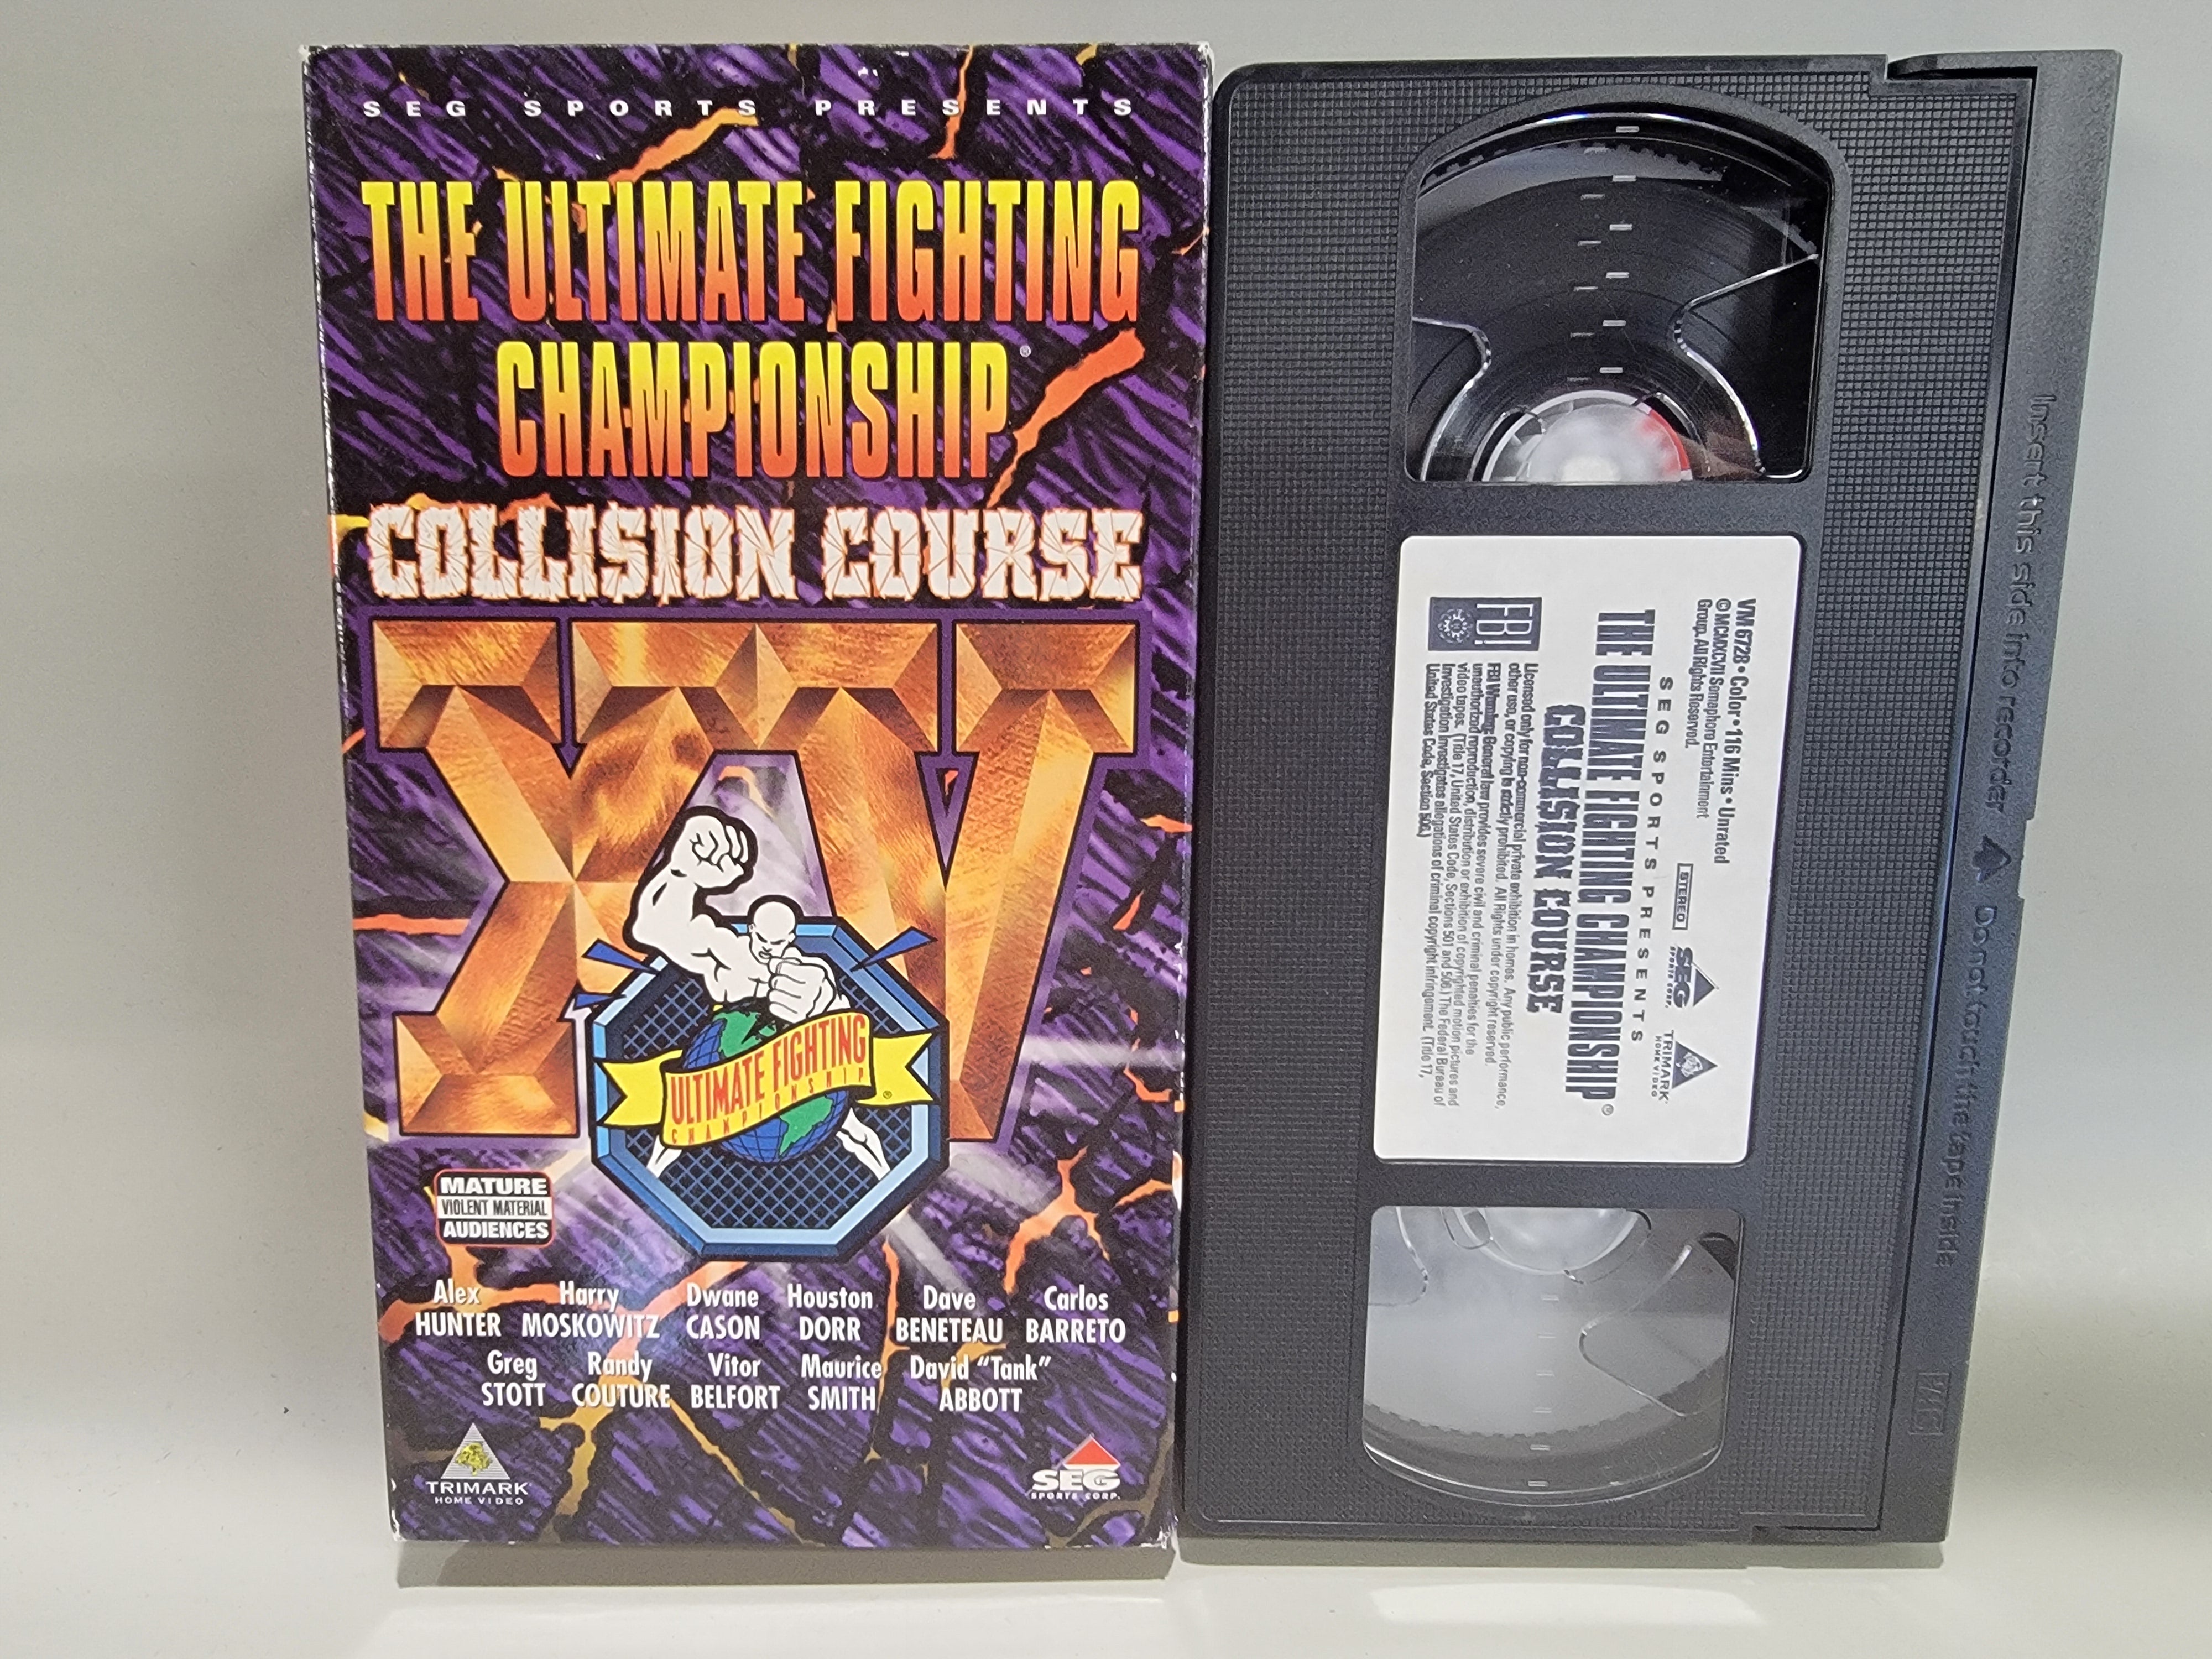 THE ULTIMATE FIGHTING CHAMPIONSHIP XV: COLLISION COURSE VHS [USED]